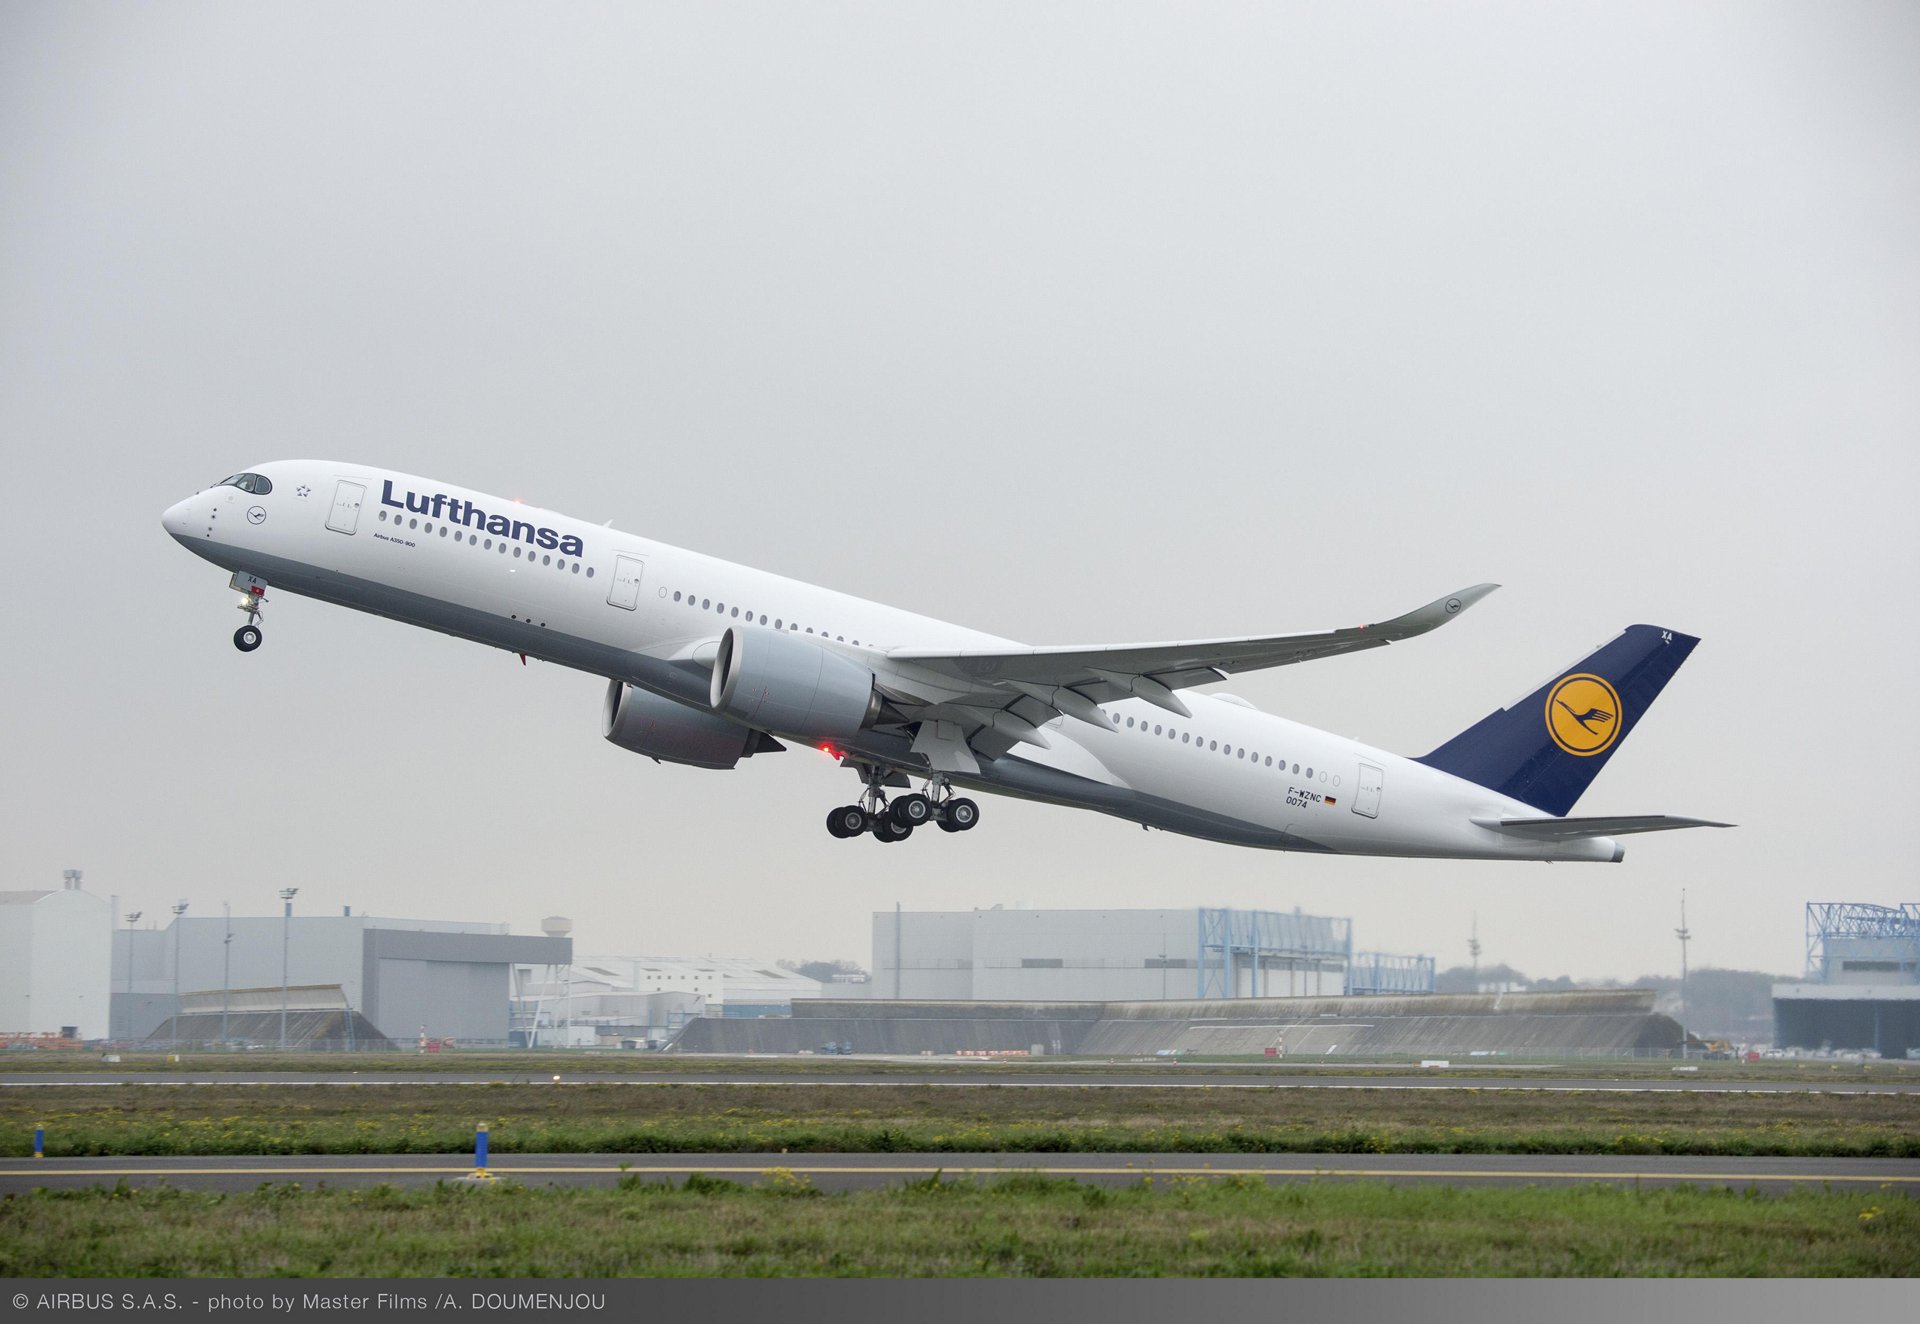 Lufthansa takes delivery of its first A350 aircraft